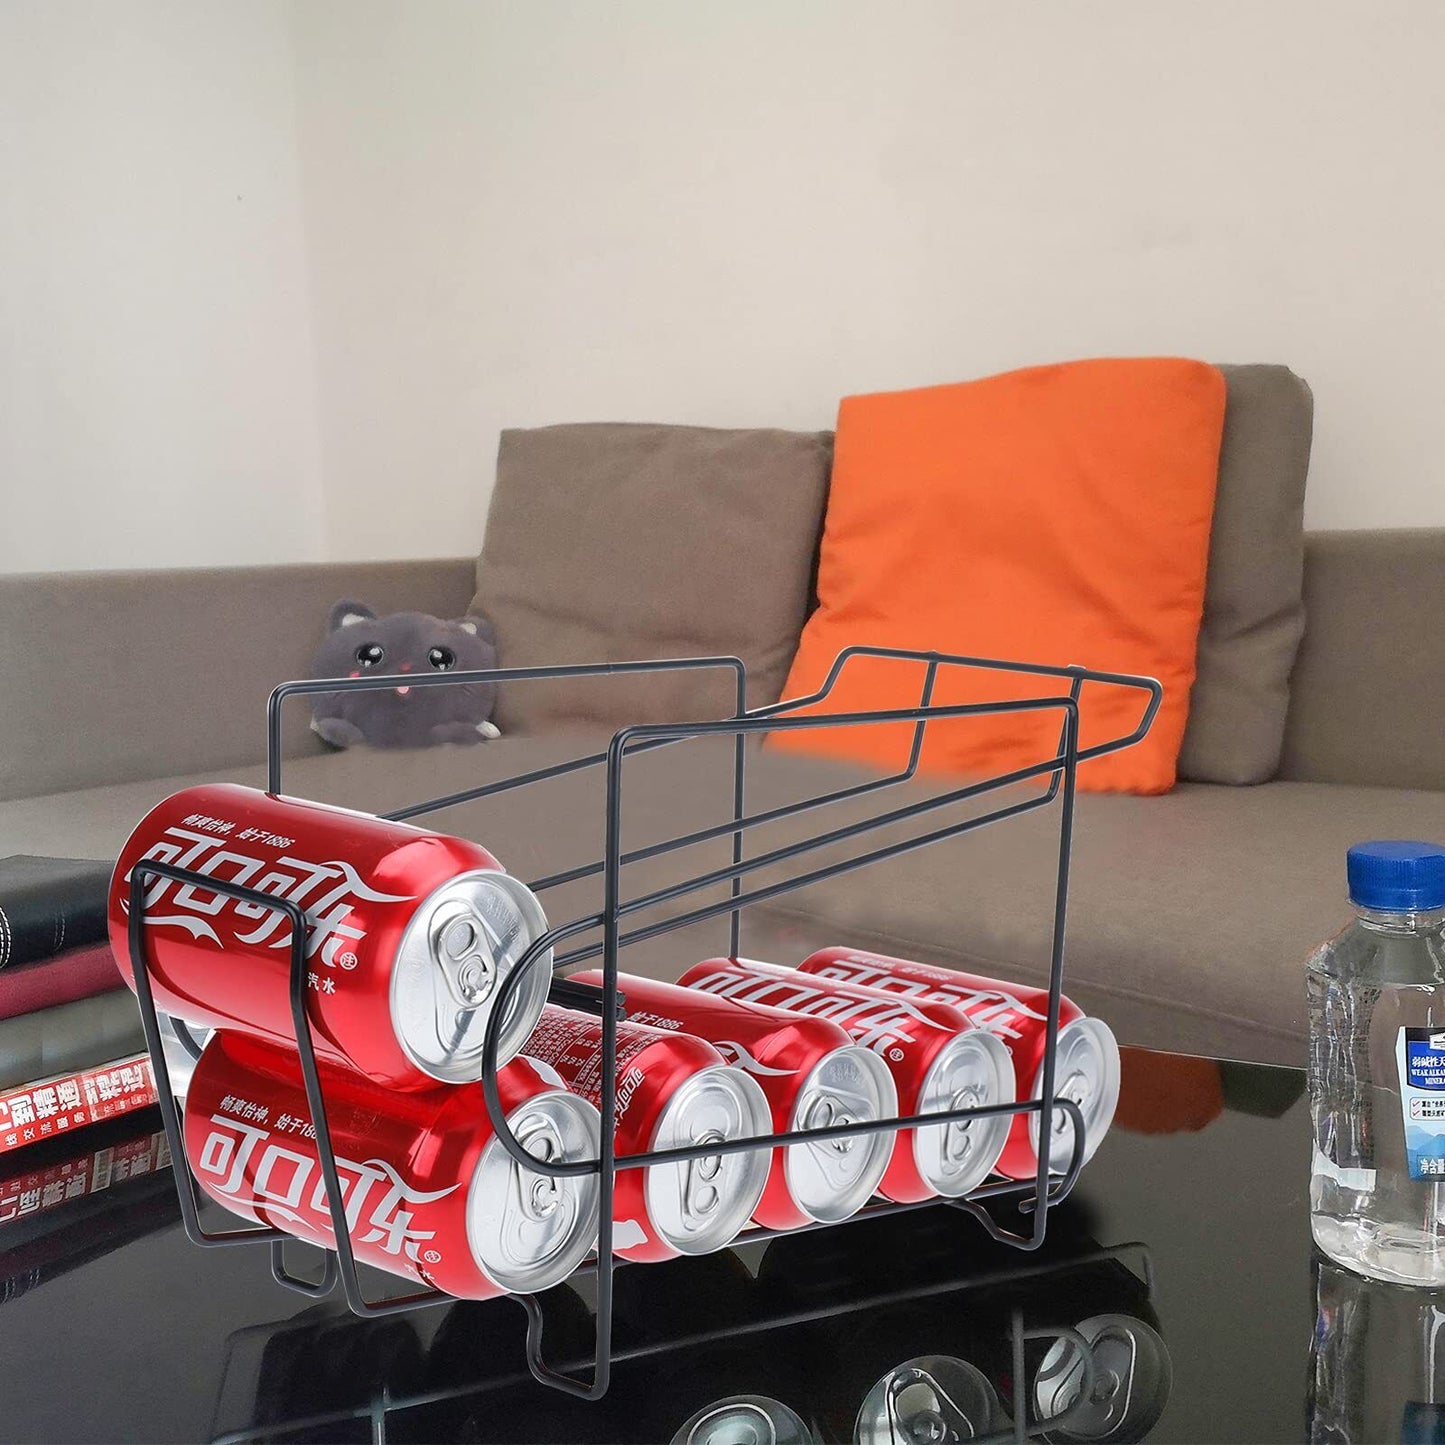 2-Tier Soda Dispenser for 20 Cans